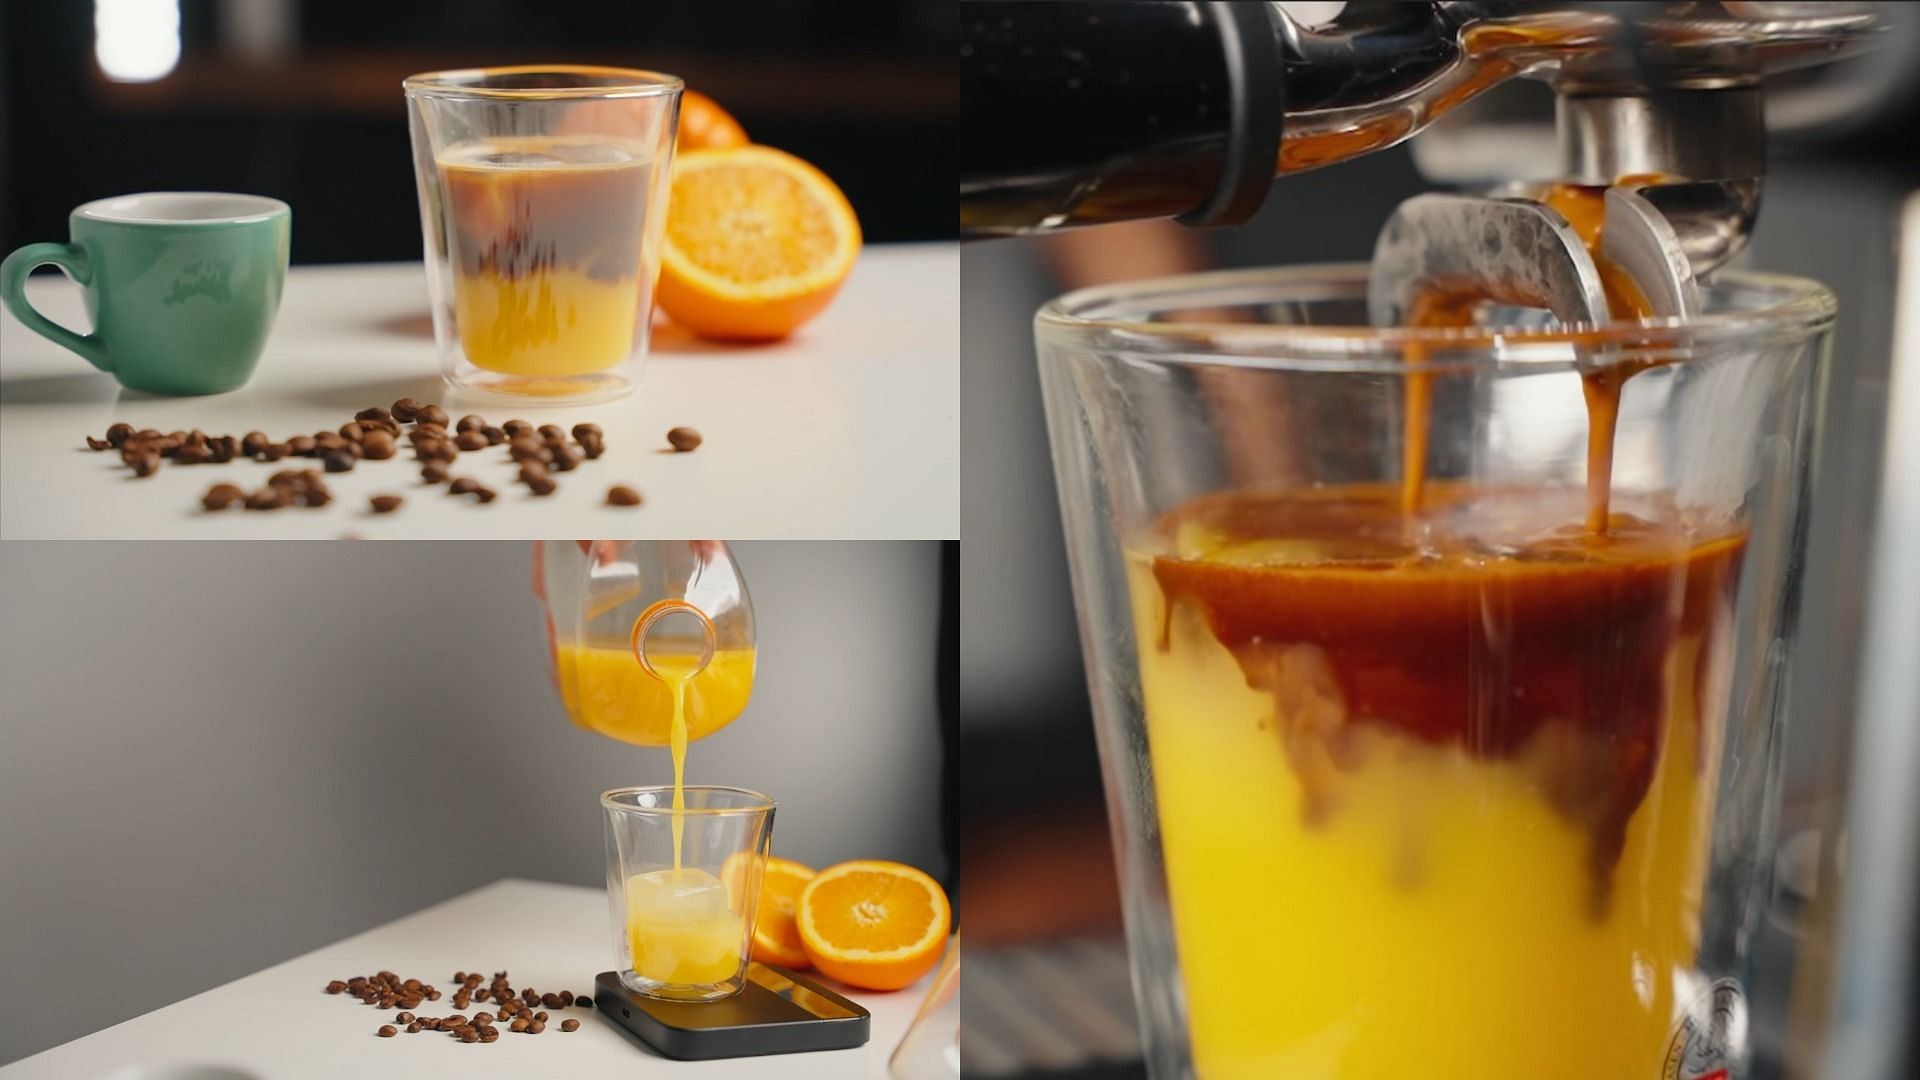 TikTok&#039;s viral coffee drink is a concoction of orange juice and expresso (Images via Kyle Rowsell/YouTube)